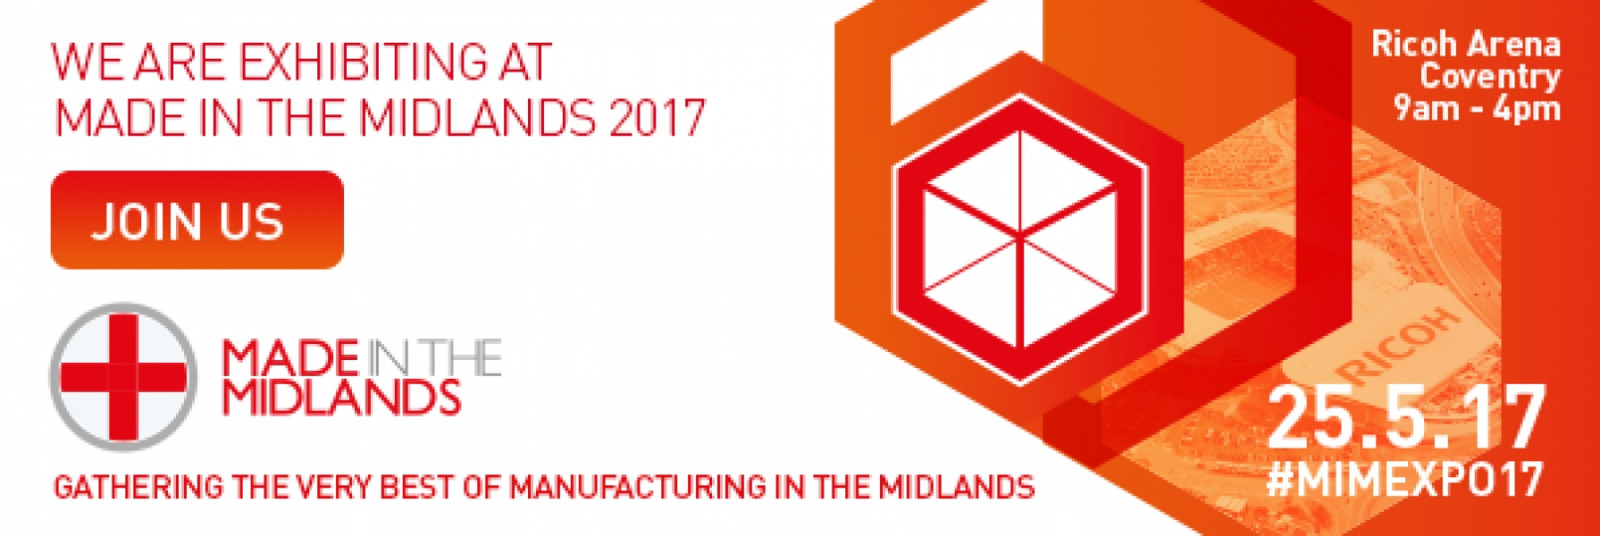 SMB Pressings invite you to attend Made In the Midlands Exhibition 2017